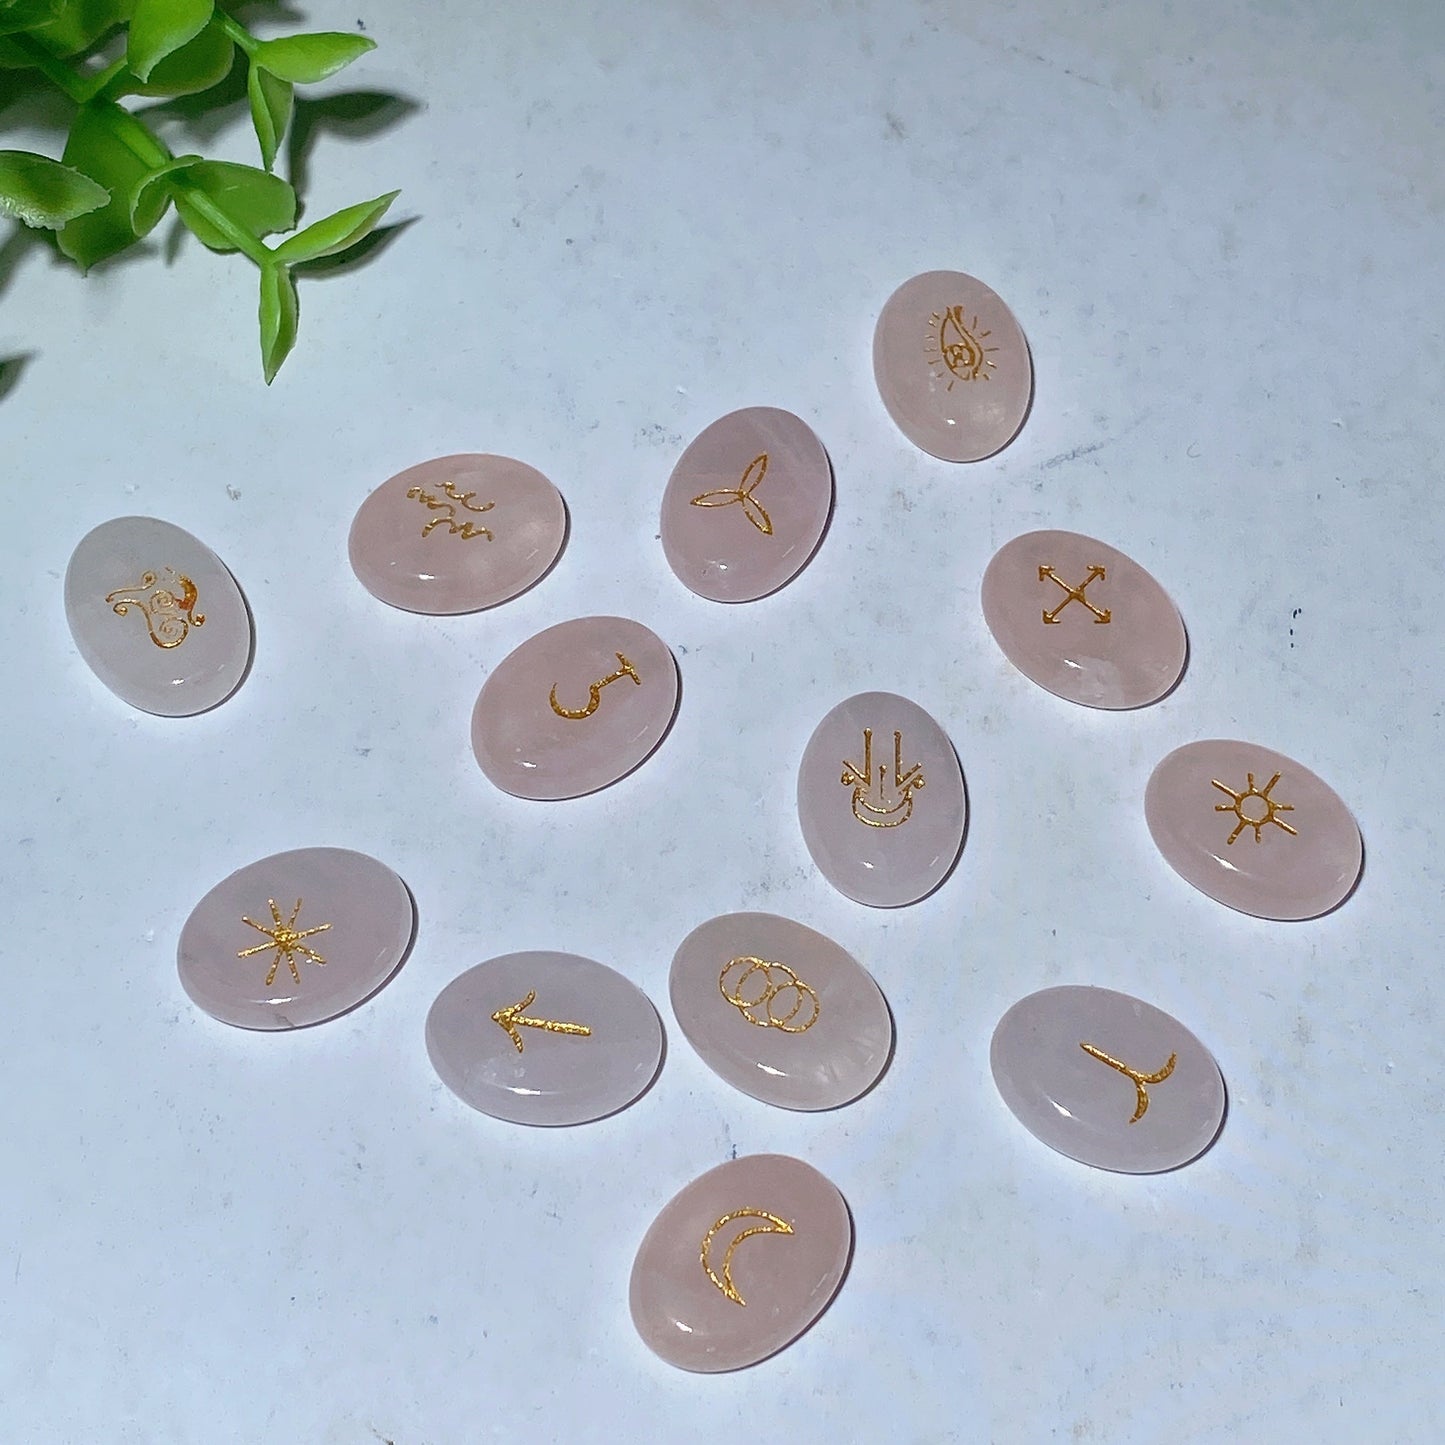 20mm Crystal Runes with Golden Printing Bulk Wholesale